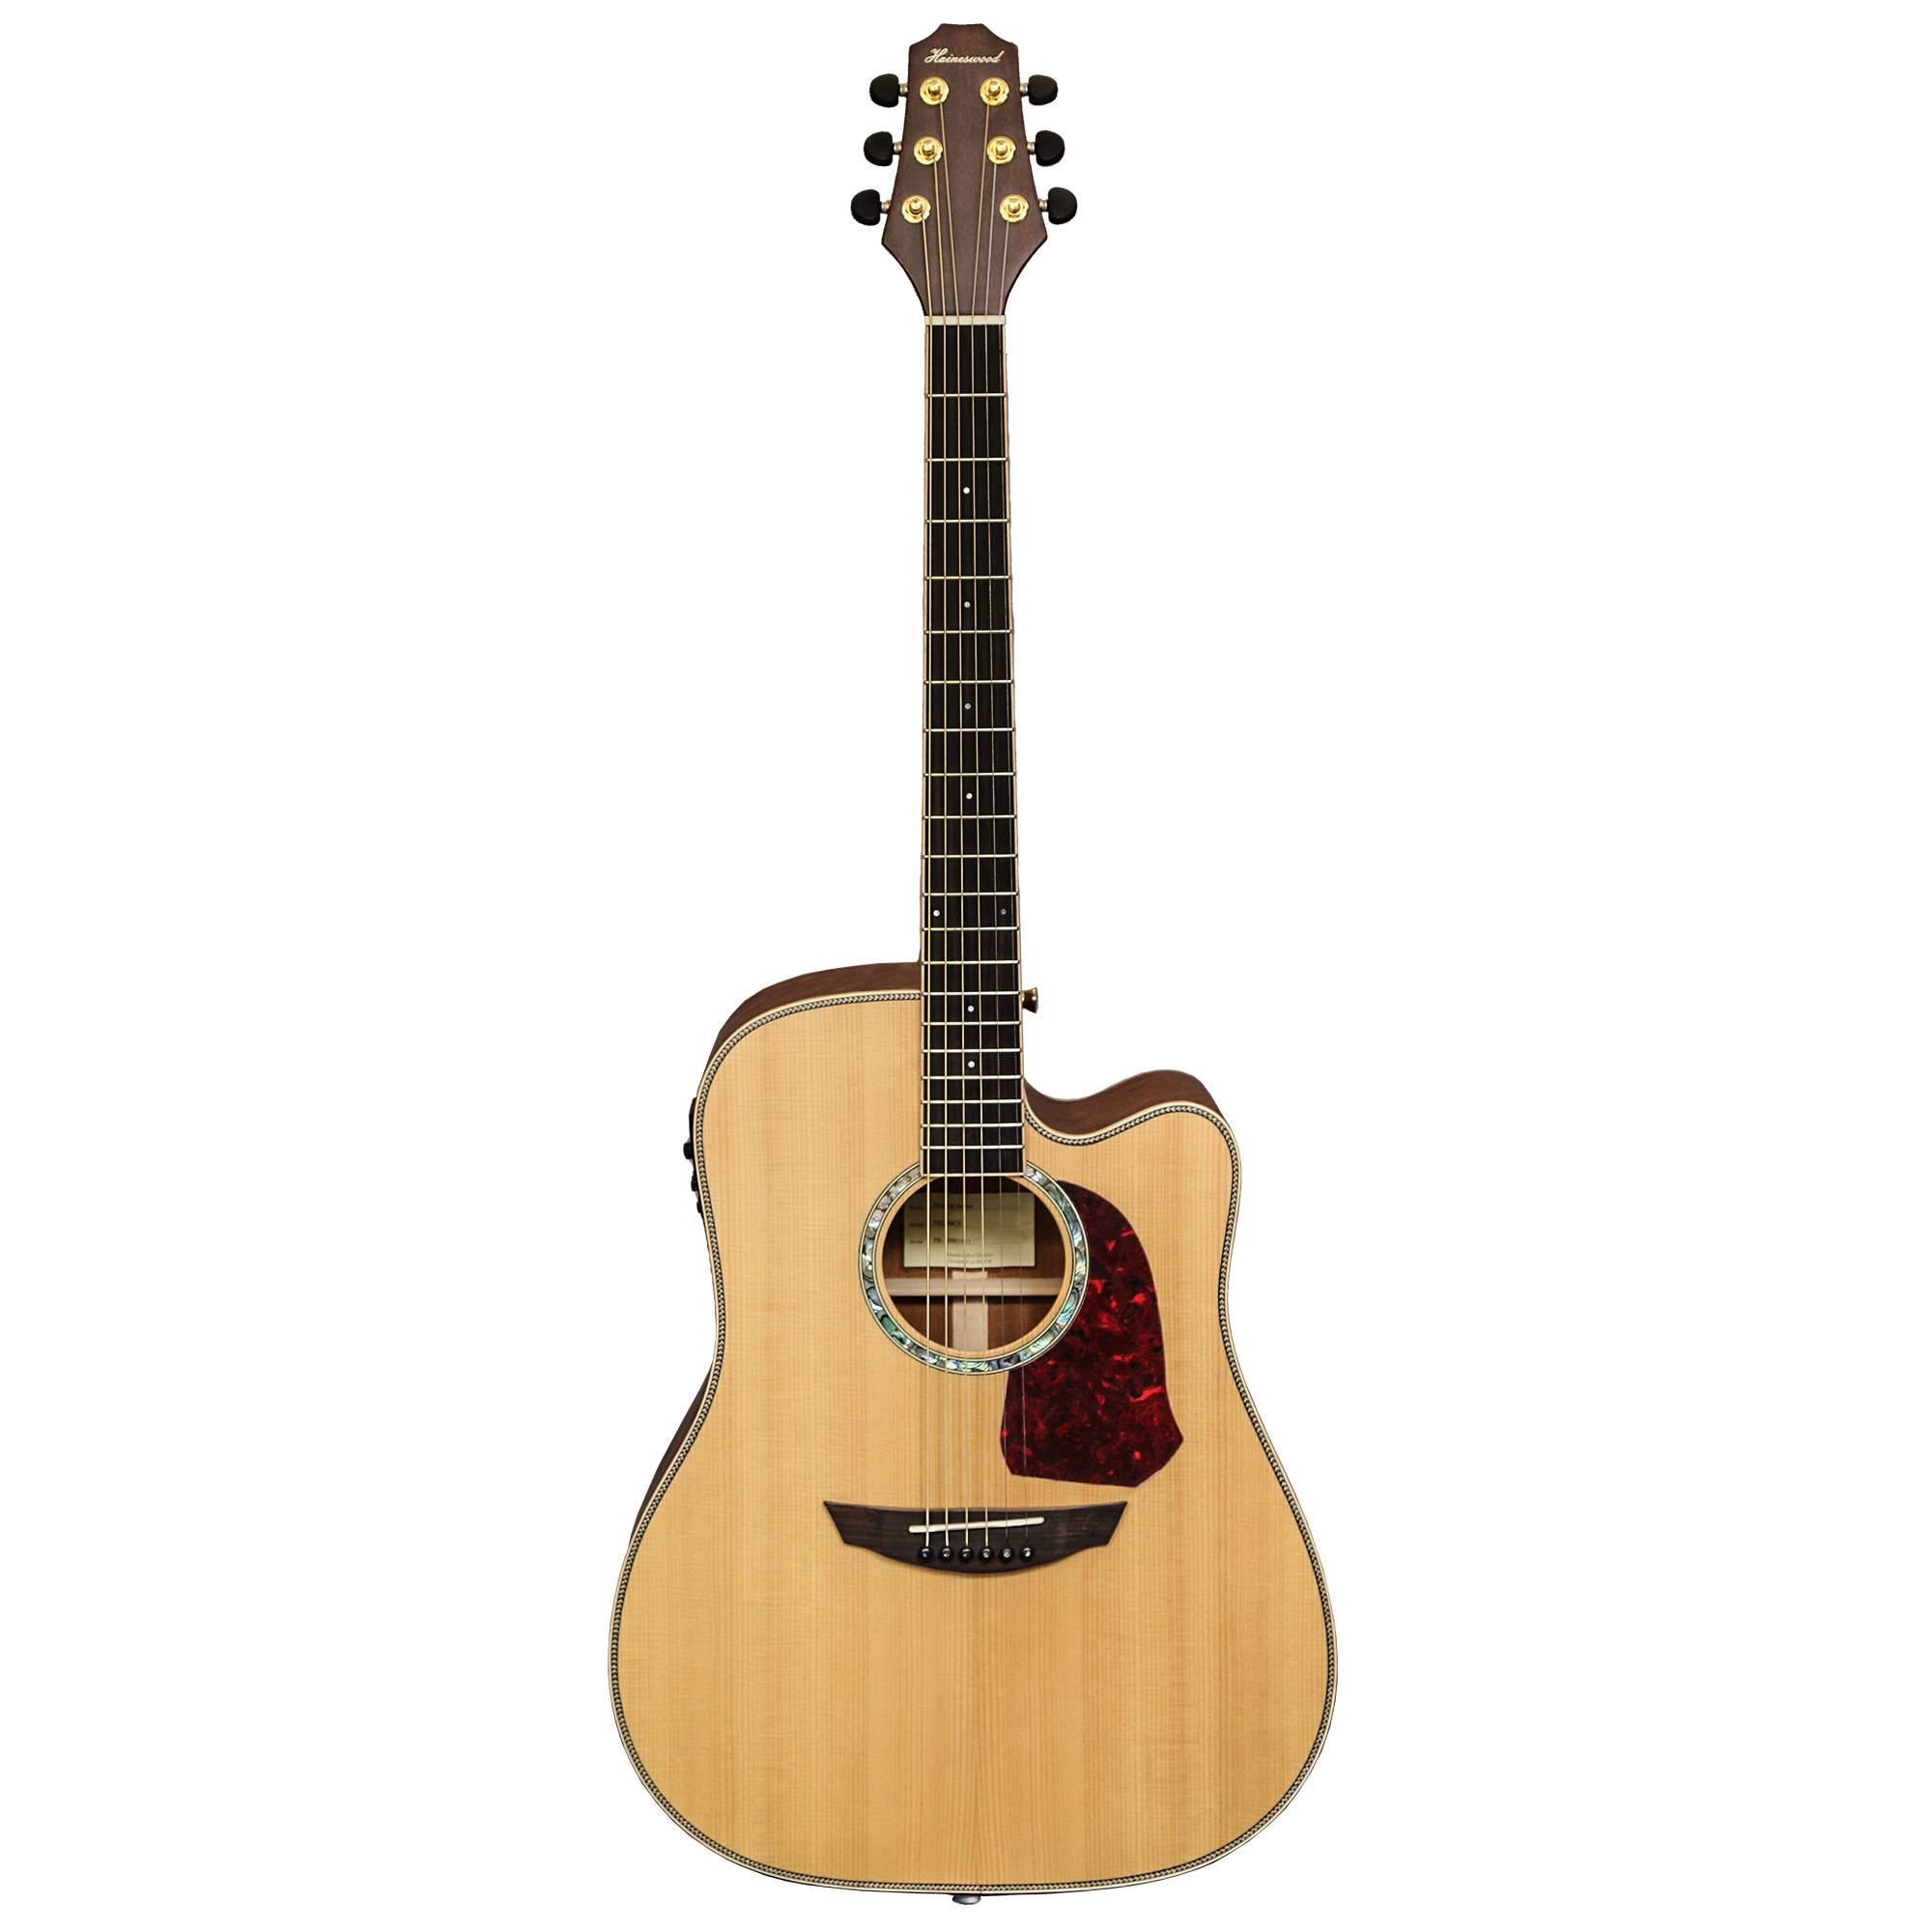 Haineswood Premier PRD90CE Dreadnought Cutaway Electro